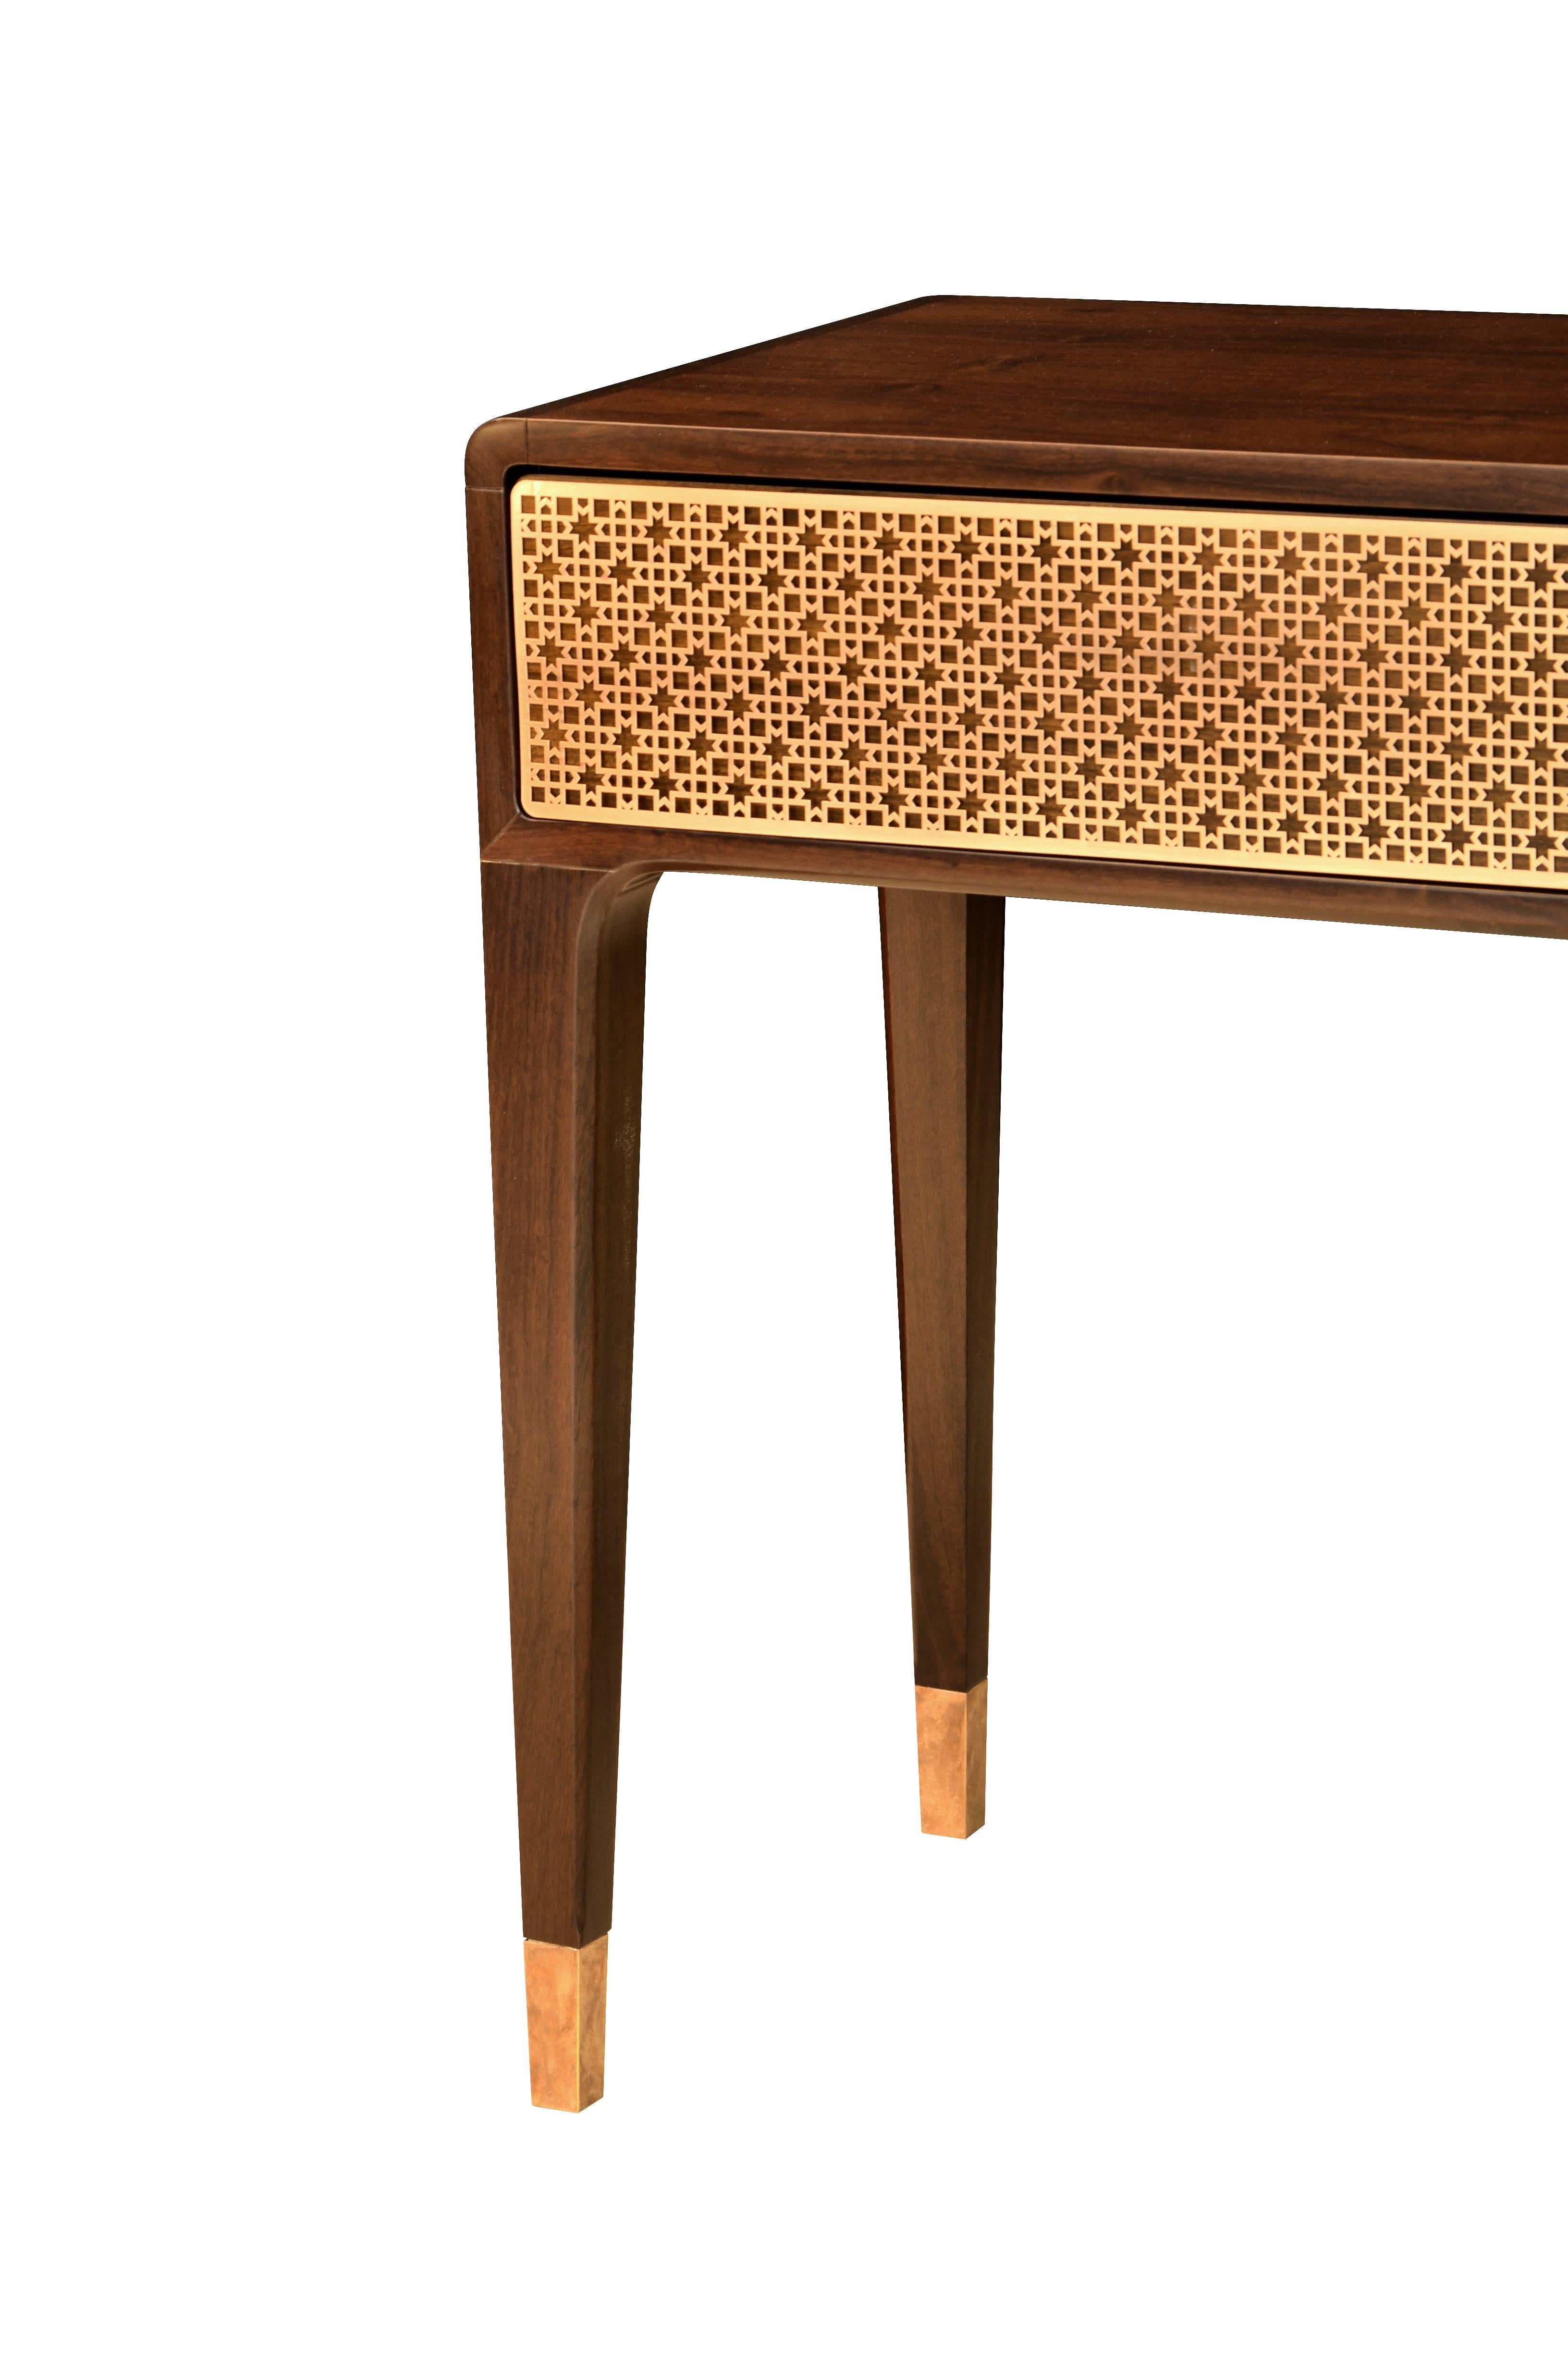 This console table is made with front drawers in laser cut brass plate with customizable patterns (Arabic, deco or customized). Brass in copper, polished, dark or light finishing.

Legs in solid wood, veneered or lacquer.

Finishing: Polyurethane